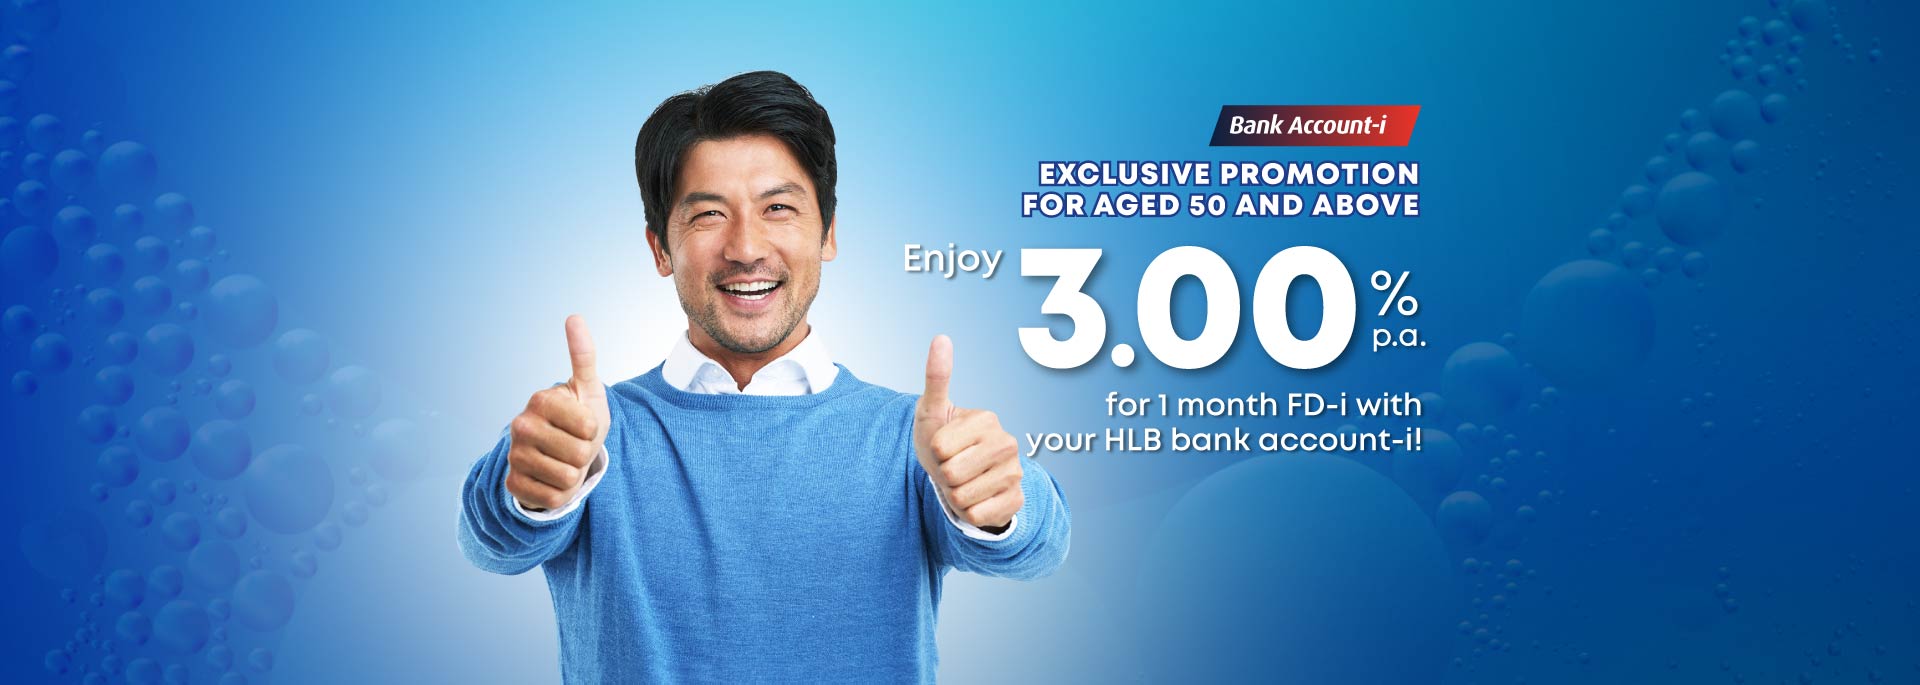 Exclusive Promotion for aged 50 and above